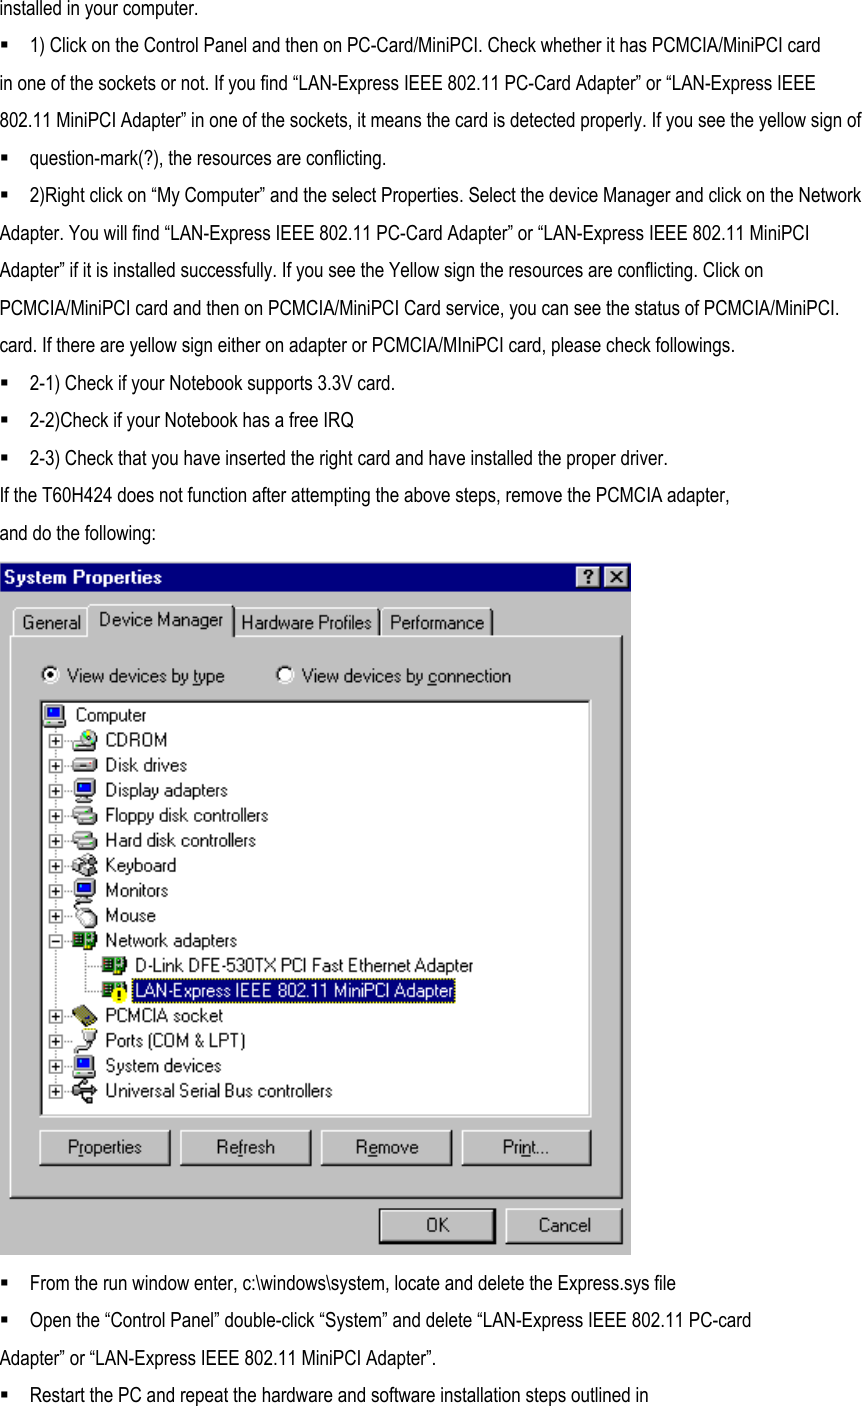 installed in your computer.  1) Click on the Control Panel and then on PC-Card/MiniPCI. Check whether it has PCMCIA/MiniPCI card in one of the sockets or not. If you find “LAN-Express IEEE 802.11 PC-Card Adapter” or “LAN-Express IEEE 802.11 MiniPCI Adapter” in one of the sockets, it means the card is detected properly. If you see the yellow sign of  question-mark(?), the resources are conflicting.  2)Right click on “My Computer” and the select Properties. Select the device Manager and click on the Network Adapter. You will find “LAN-Express IEEE 802.11 PC-Card Adapter” or “LAN-Express IEEE 802.11 MiniPCI Adapter” if it is installed successfully. If you see the Yellow sign the resources are conflicting. Click on PCMCIA/MiniPCI card and then on PCMCIA/MiniPCI Card service, you can see the status of PCMCIA/MiniPCI. card. If there are yellow sign either on adapter or PCMCIA/MIniPCI card, please check followings.  2-1) Check if your Notebook supports 3.3V card.  2-2)Check if your Notebook has a free IRQ  2-3) Check that you have inserted the right card and have installed the proper driver. If the T60H424 does not function after attempting the above steps, remove the PCMCIA adapter, and do the following:   From the run window enter, c:\windows\system, locate and delete the Express.sys file  Open the “Control Panel” double-click “System” and delete “LAN-Express IEEE 802.11 PC-card Adapter” or “LAN-Express IEEE 802.11 MiniPCI Adapter”.  Restart the PC and repeat the hardware and software installation steps outlined in 